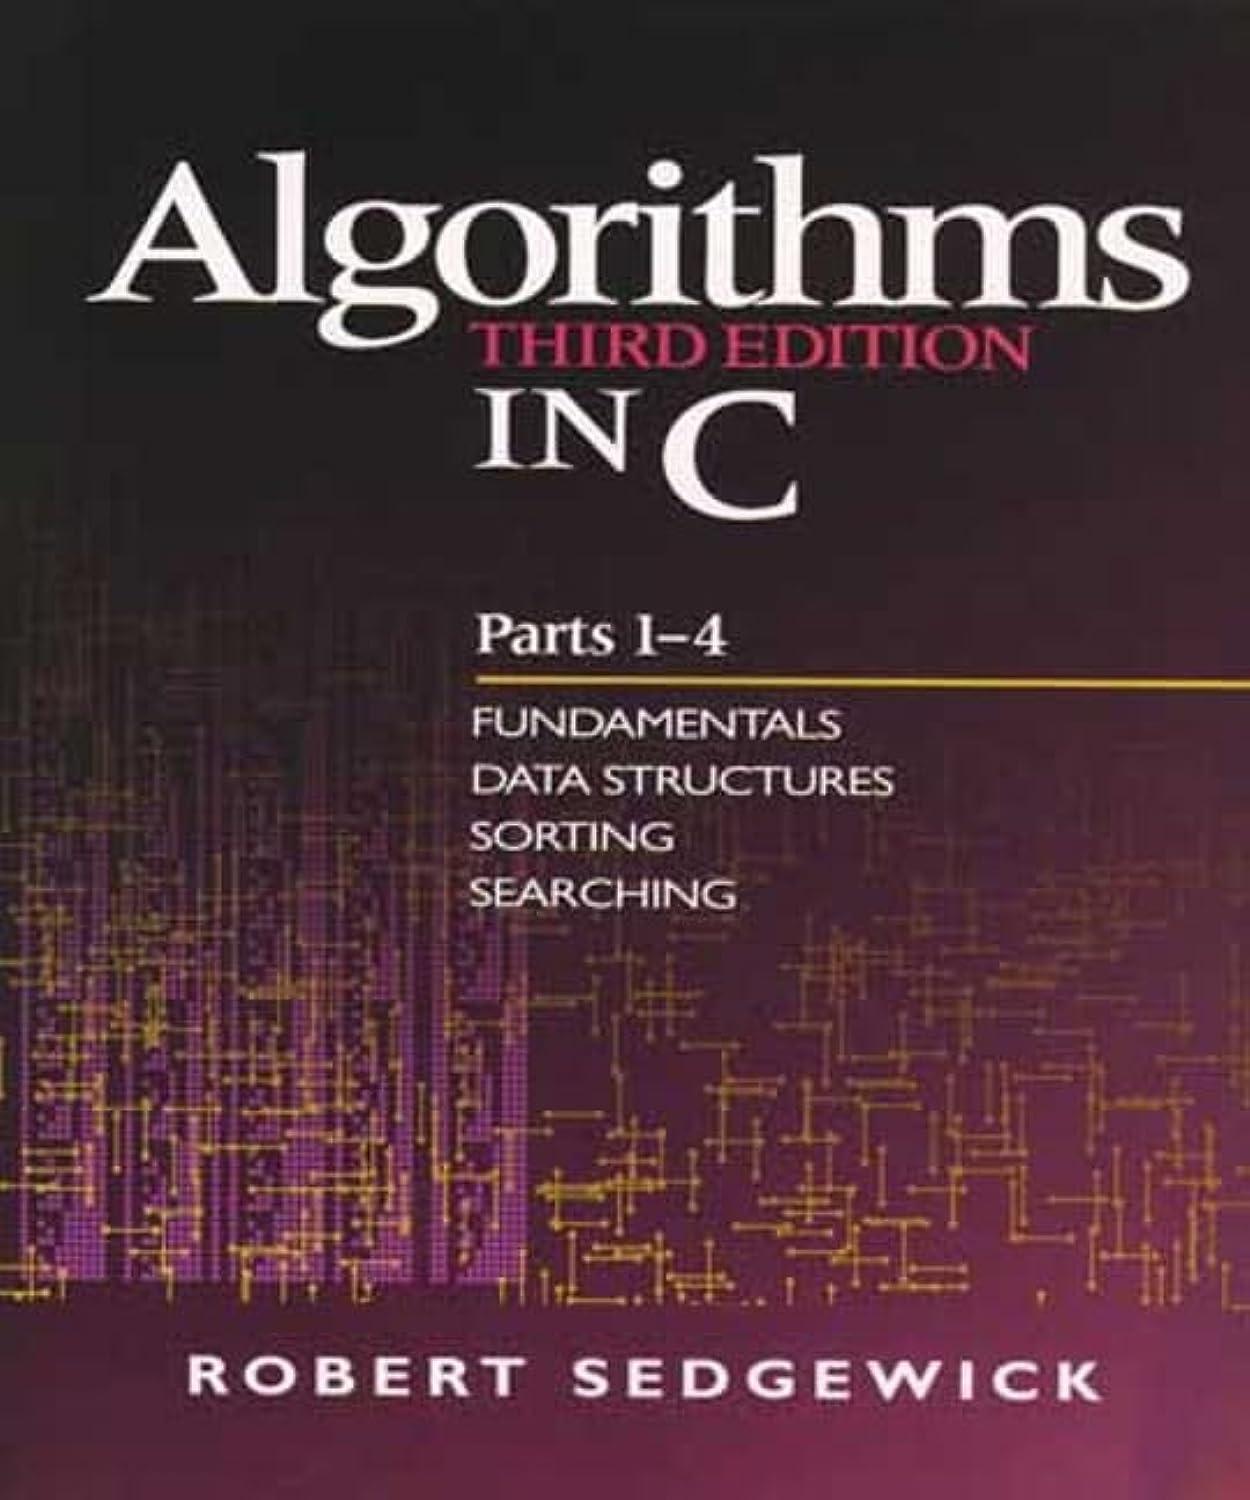 algorithms in c parts 1 4 fundamentals data structures sorting searching 3rd edition robert sedgewick